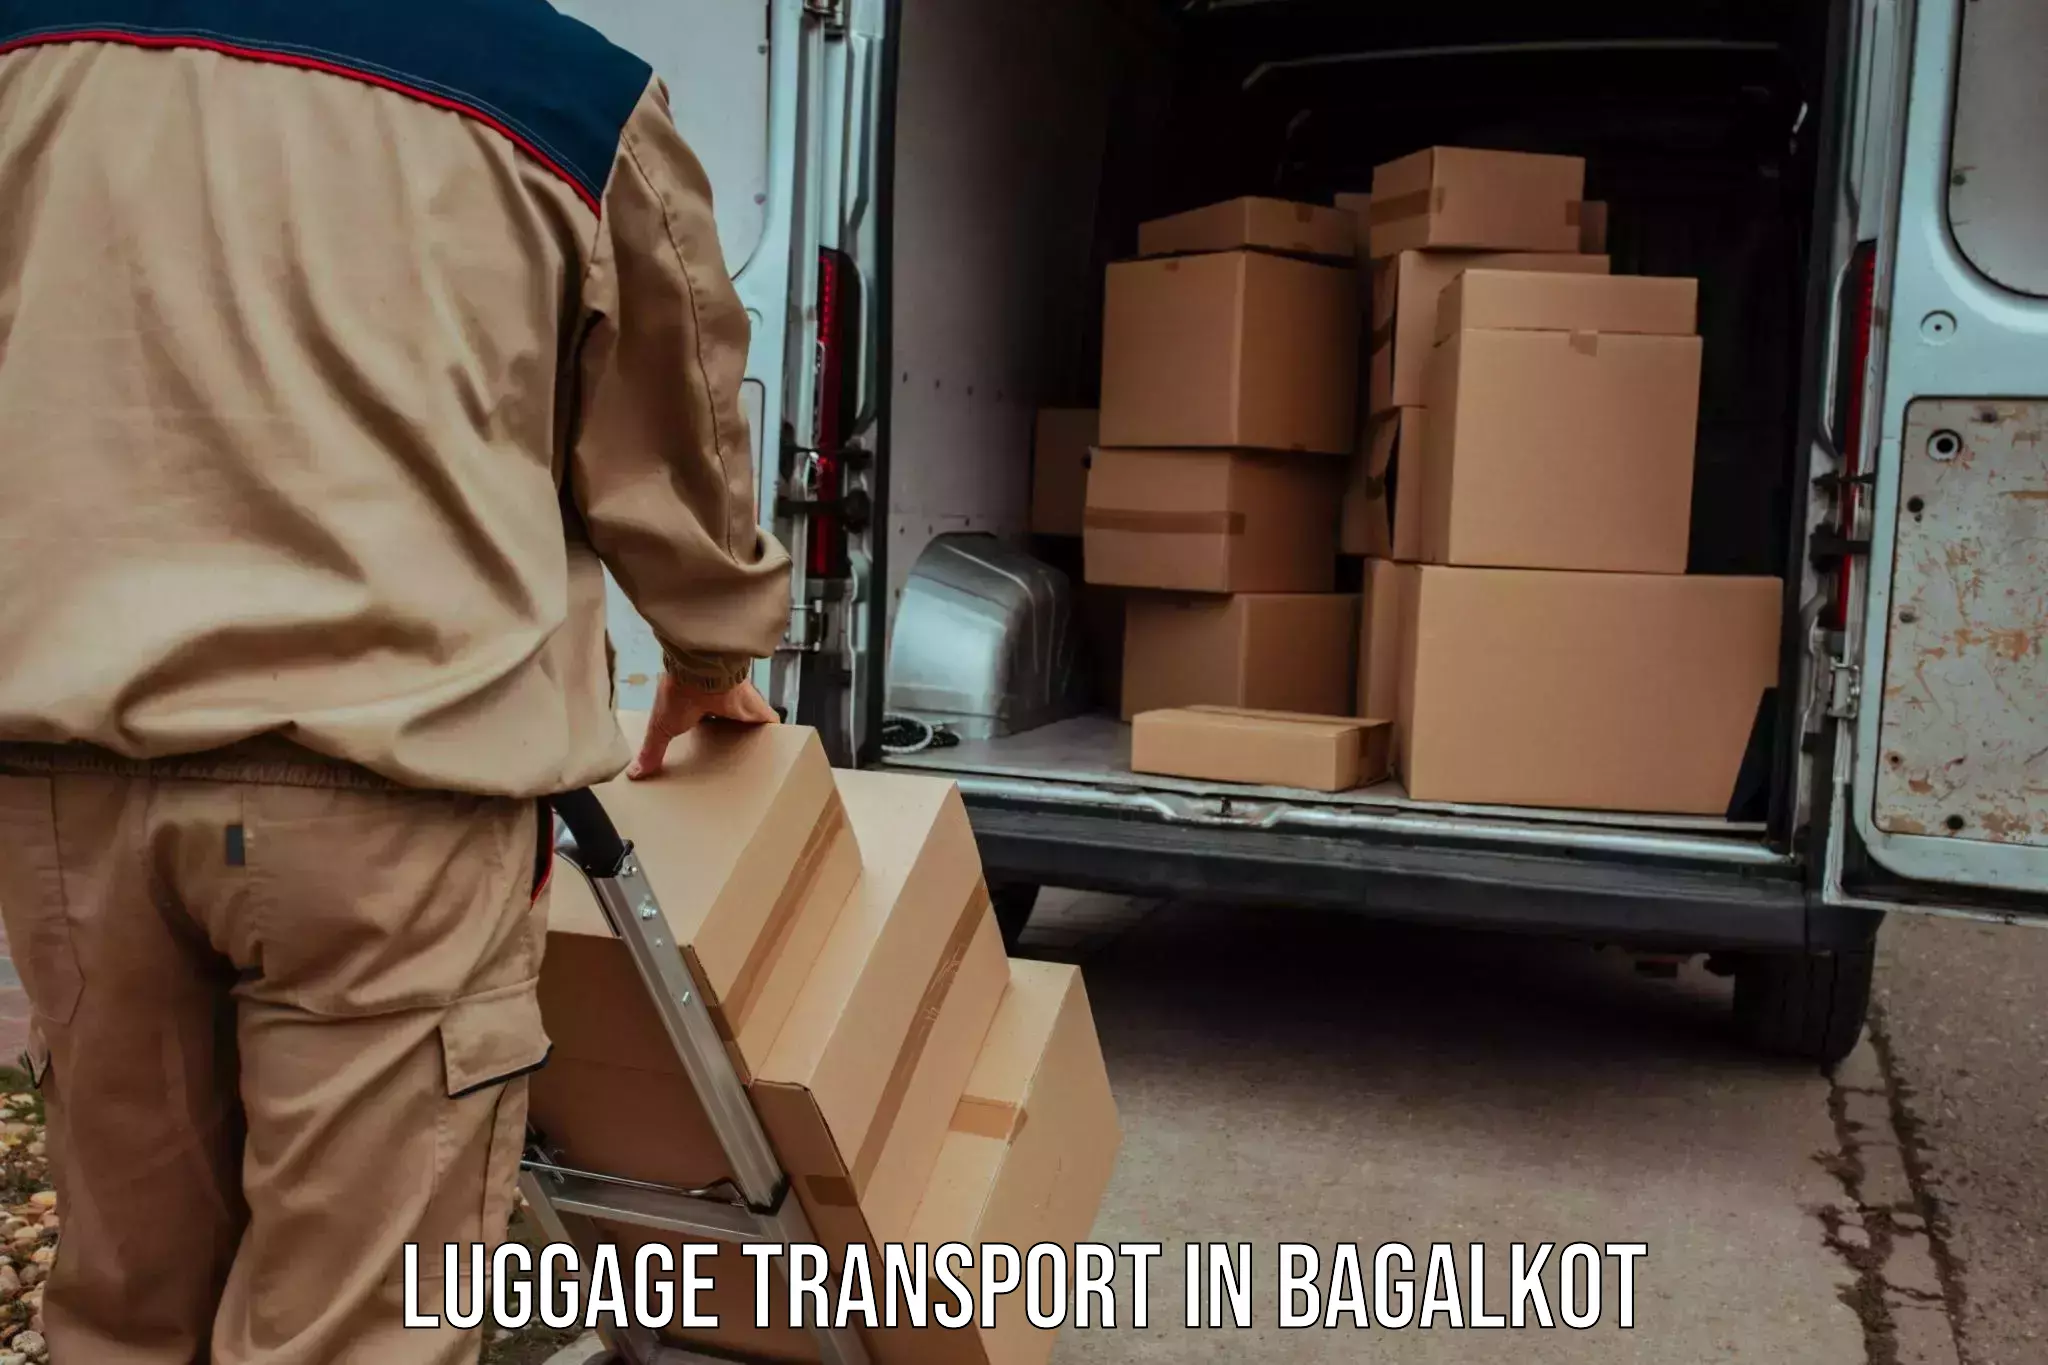 Luggage storage and delivery in Bagalkot